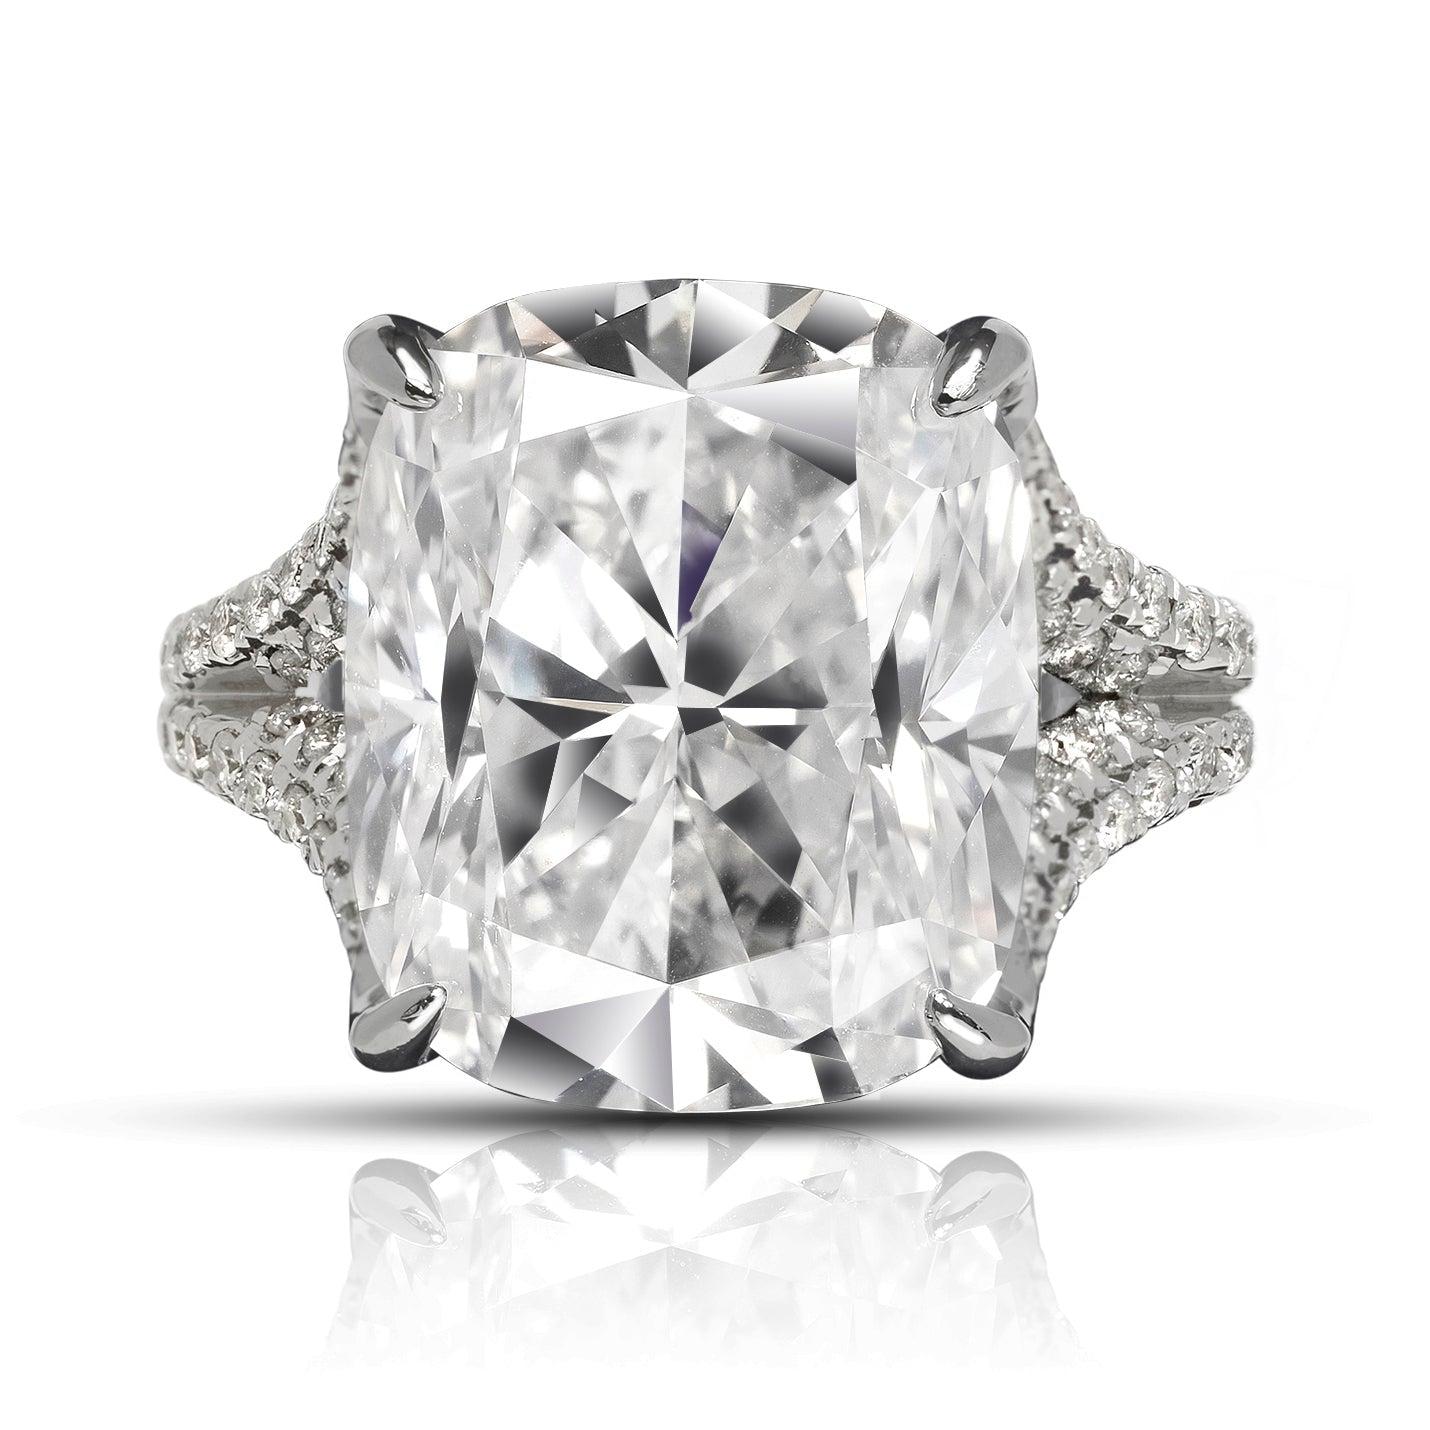 VICTORIA -13 CT CUSHION DIAMOND ENGAGEMENT RING BY MIKE NEKTA

GIA CERTIFIED

Center Diamond:
Carat Weight: 11.2 Carat
Color: E*
Clarity: VVS1
Style: CUSHION BRILLIANT
Measurements: 14.4 x 12.0 x 8.2 mm
* This diamond has been treated by one or more